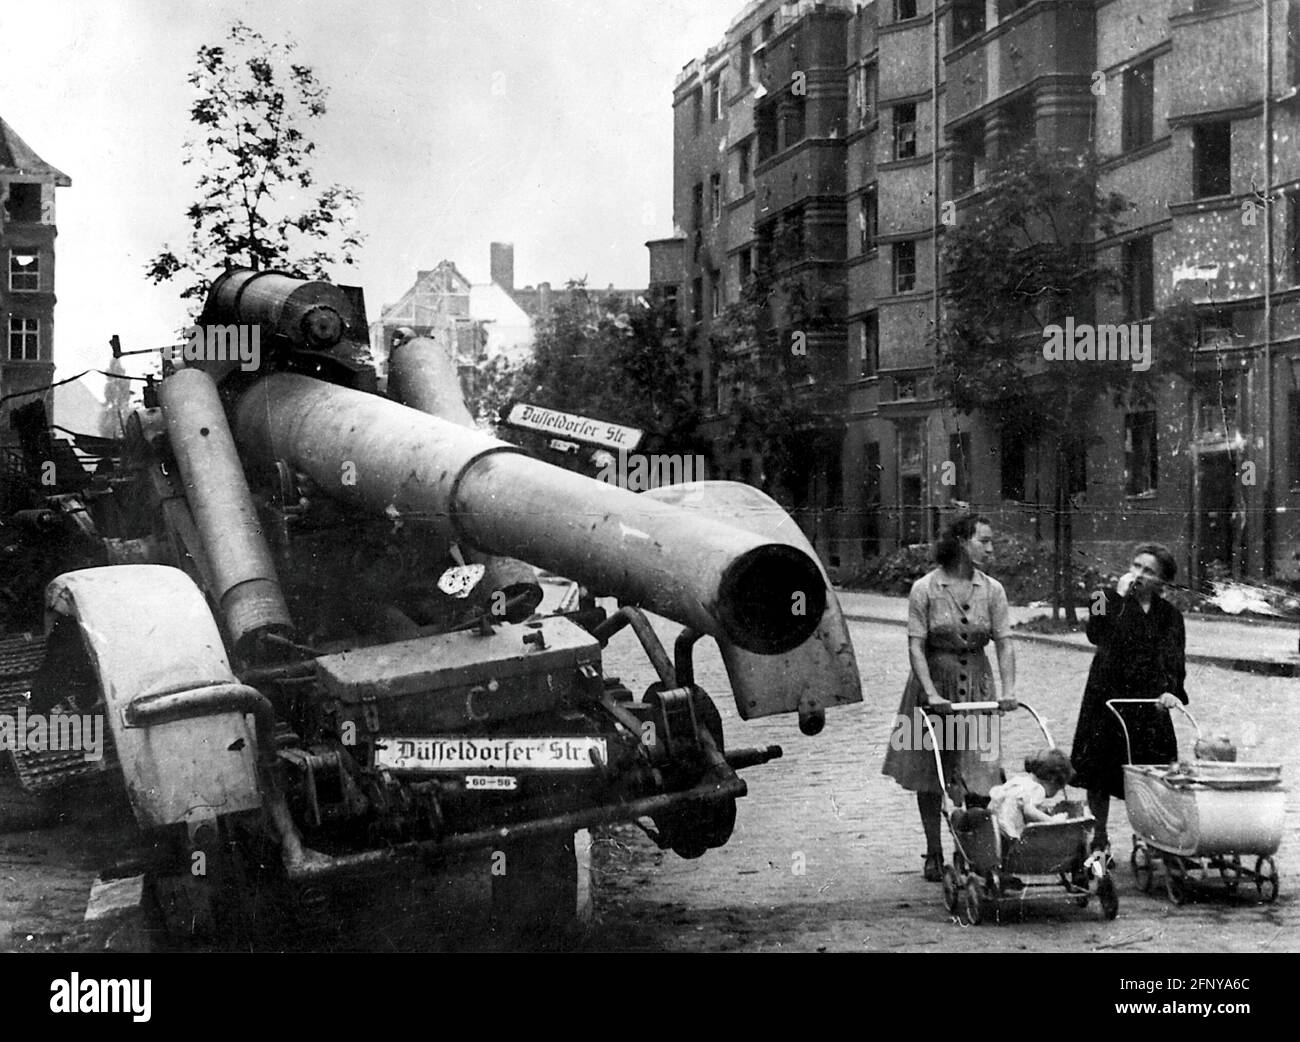 postwar period, cities, Berlin, two women with prams beside a destroyed heavy German howitzer, road sign 'Duesseldorfer Strasse', EDITORIAL-USE-ONLY Stock Photo